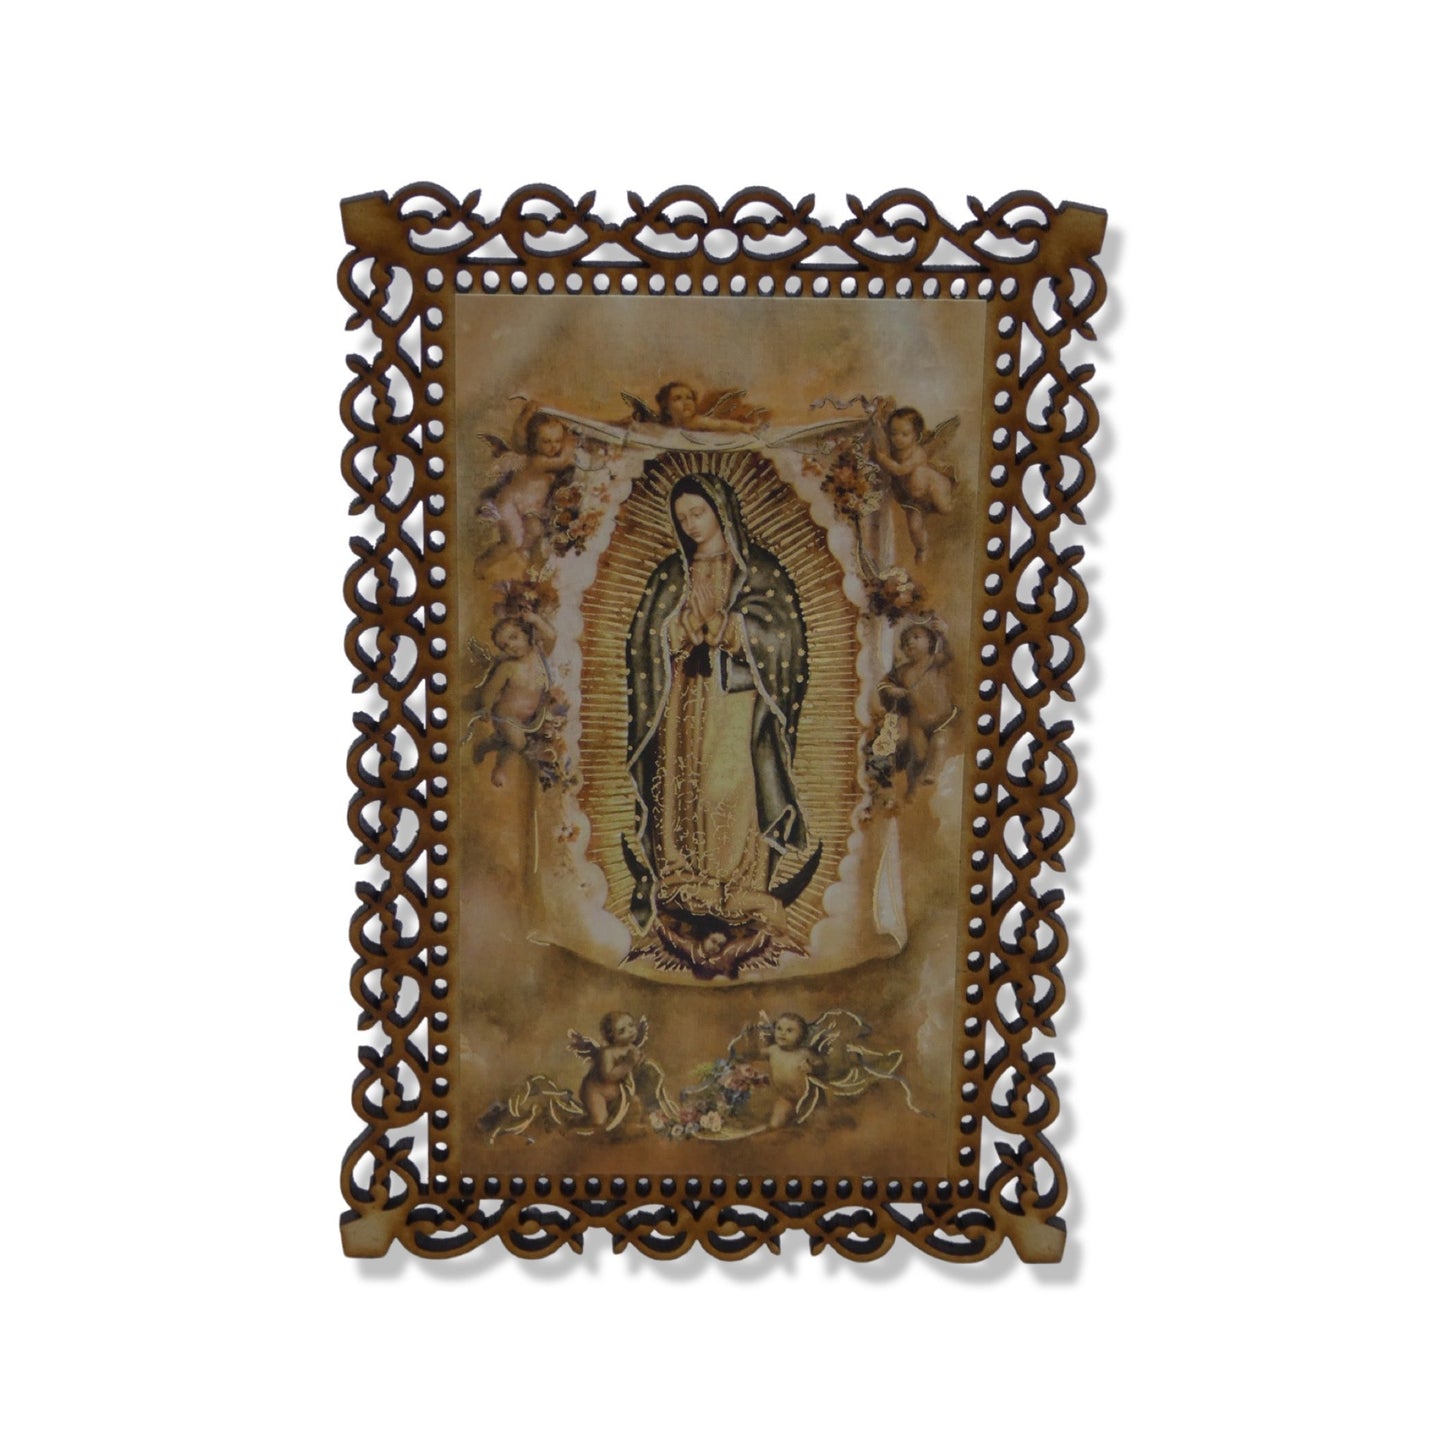 Wood Carved Guadalupe Tilma Image